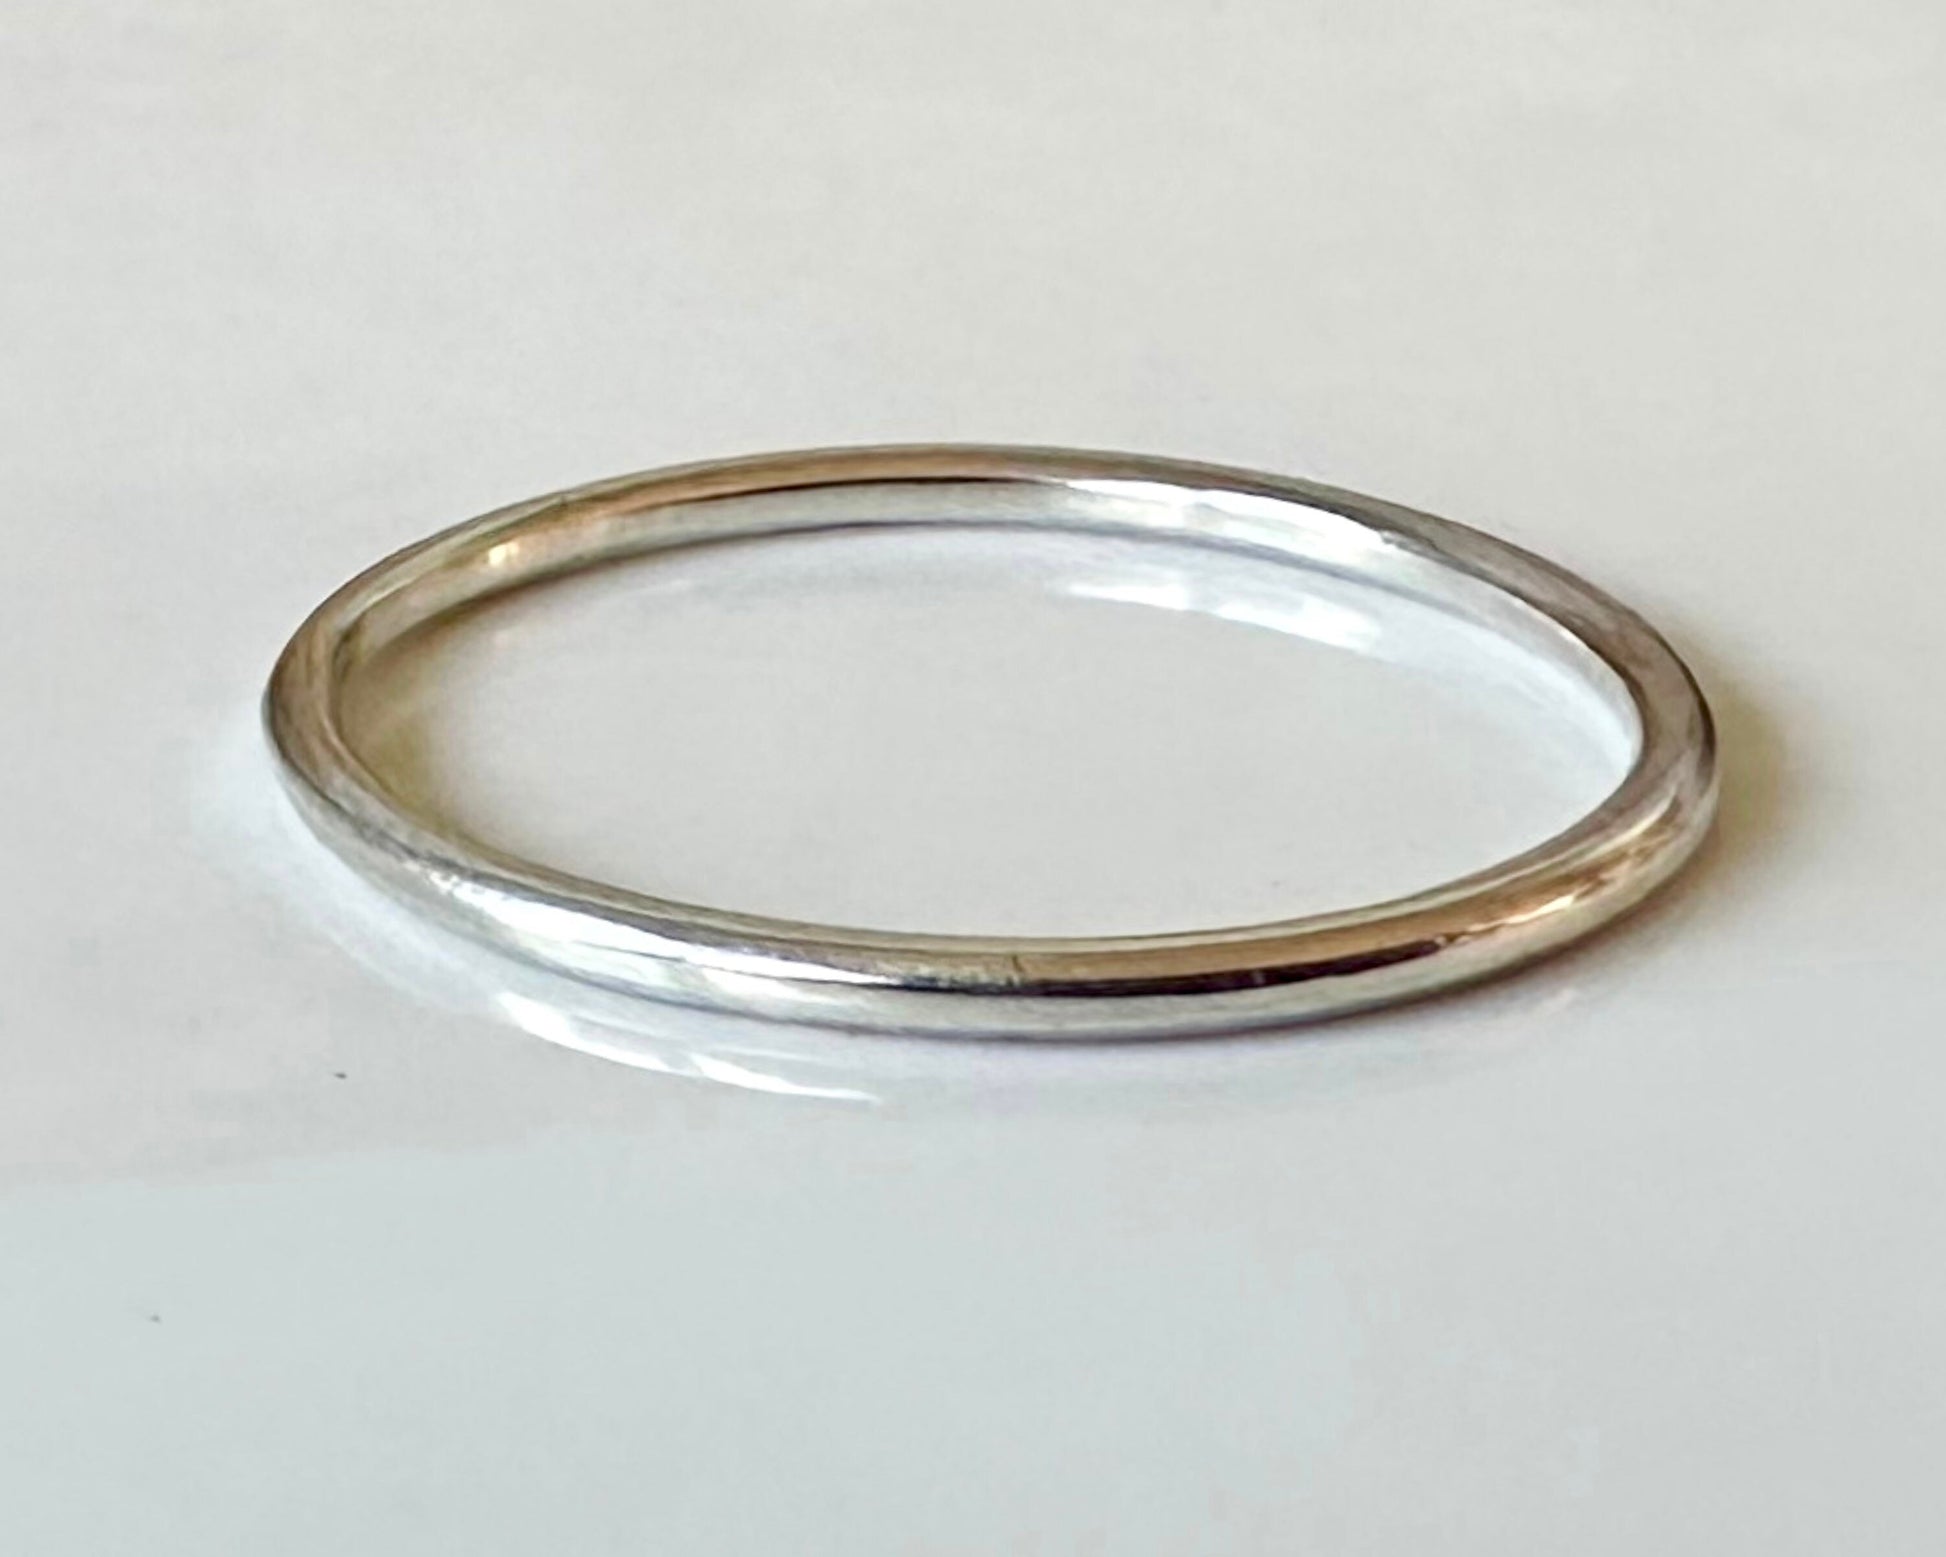 Solid 9ct Gold and 925 Sterling Silver Ring Set, Hallmarked 1.2mm, 1.5mm, 1.8mm Gold and Silver Plain Ring Band Set of Two